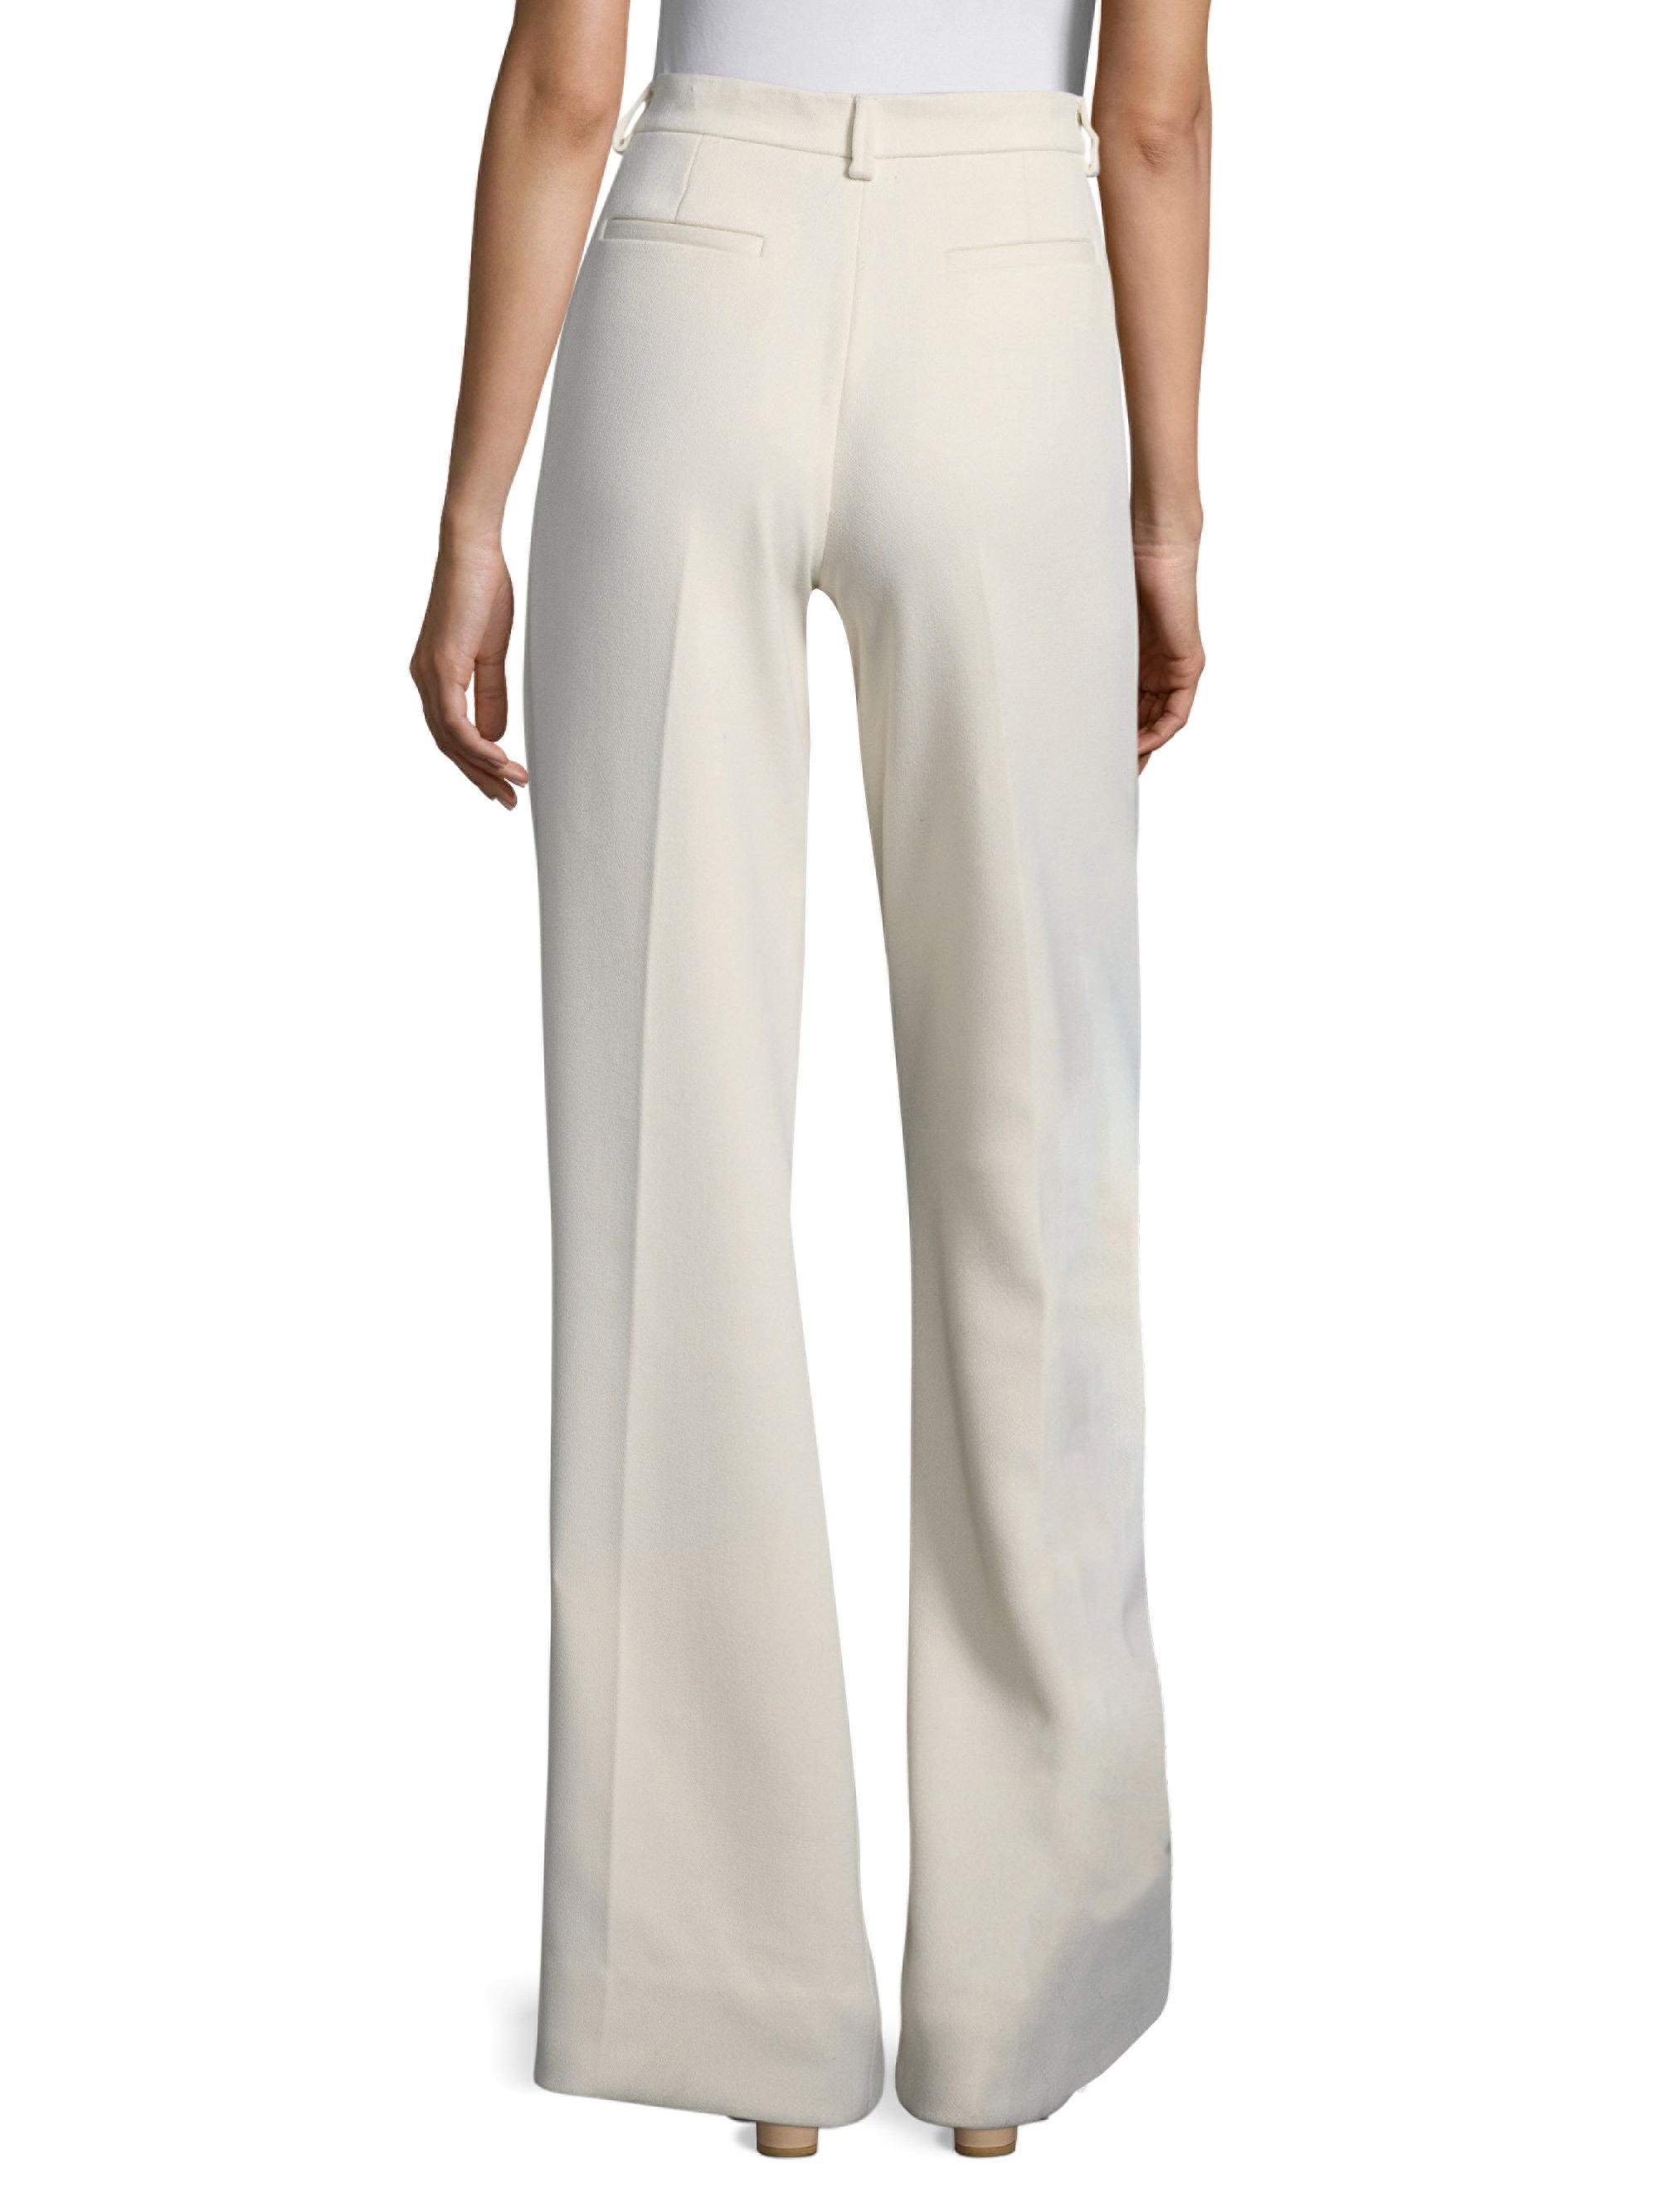 Lyst - Tory Burch Thomas Trousers in Natural